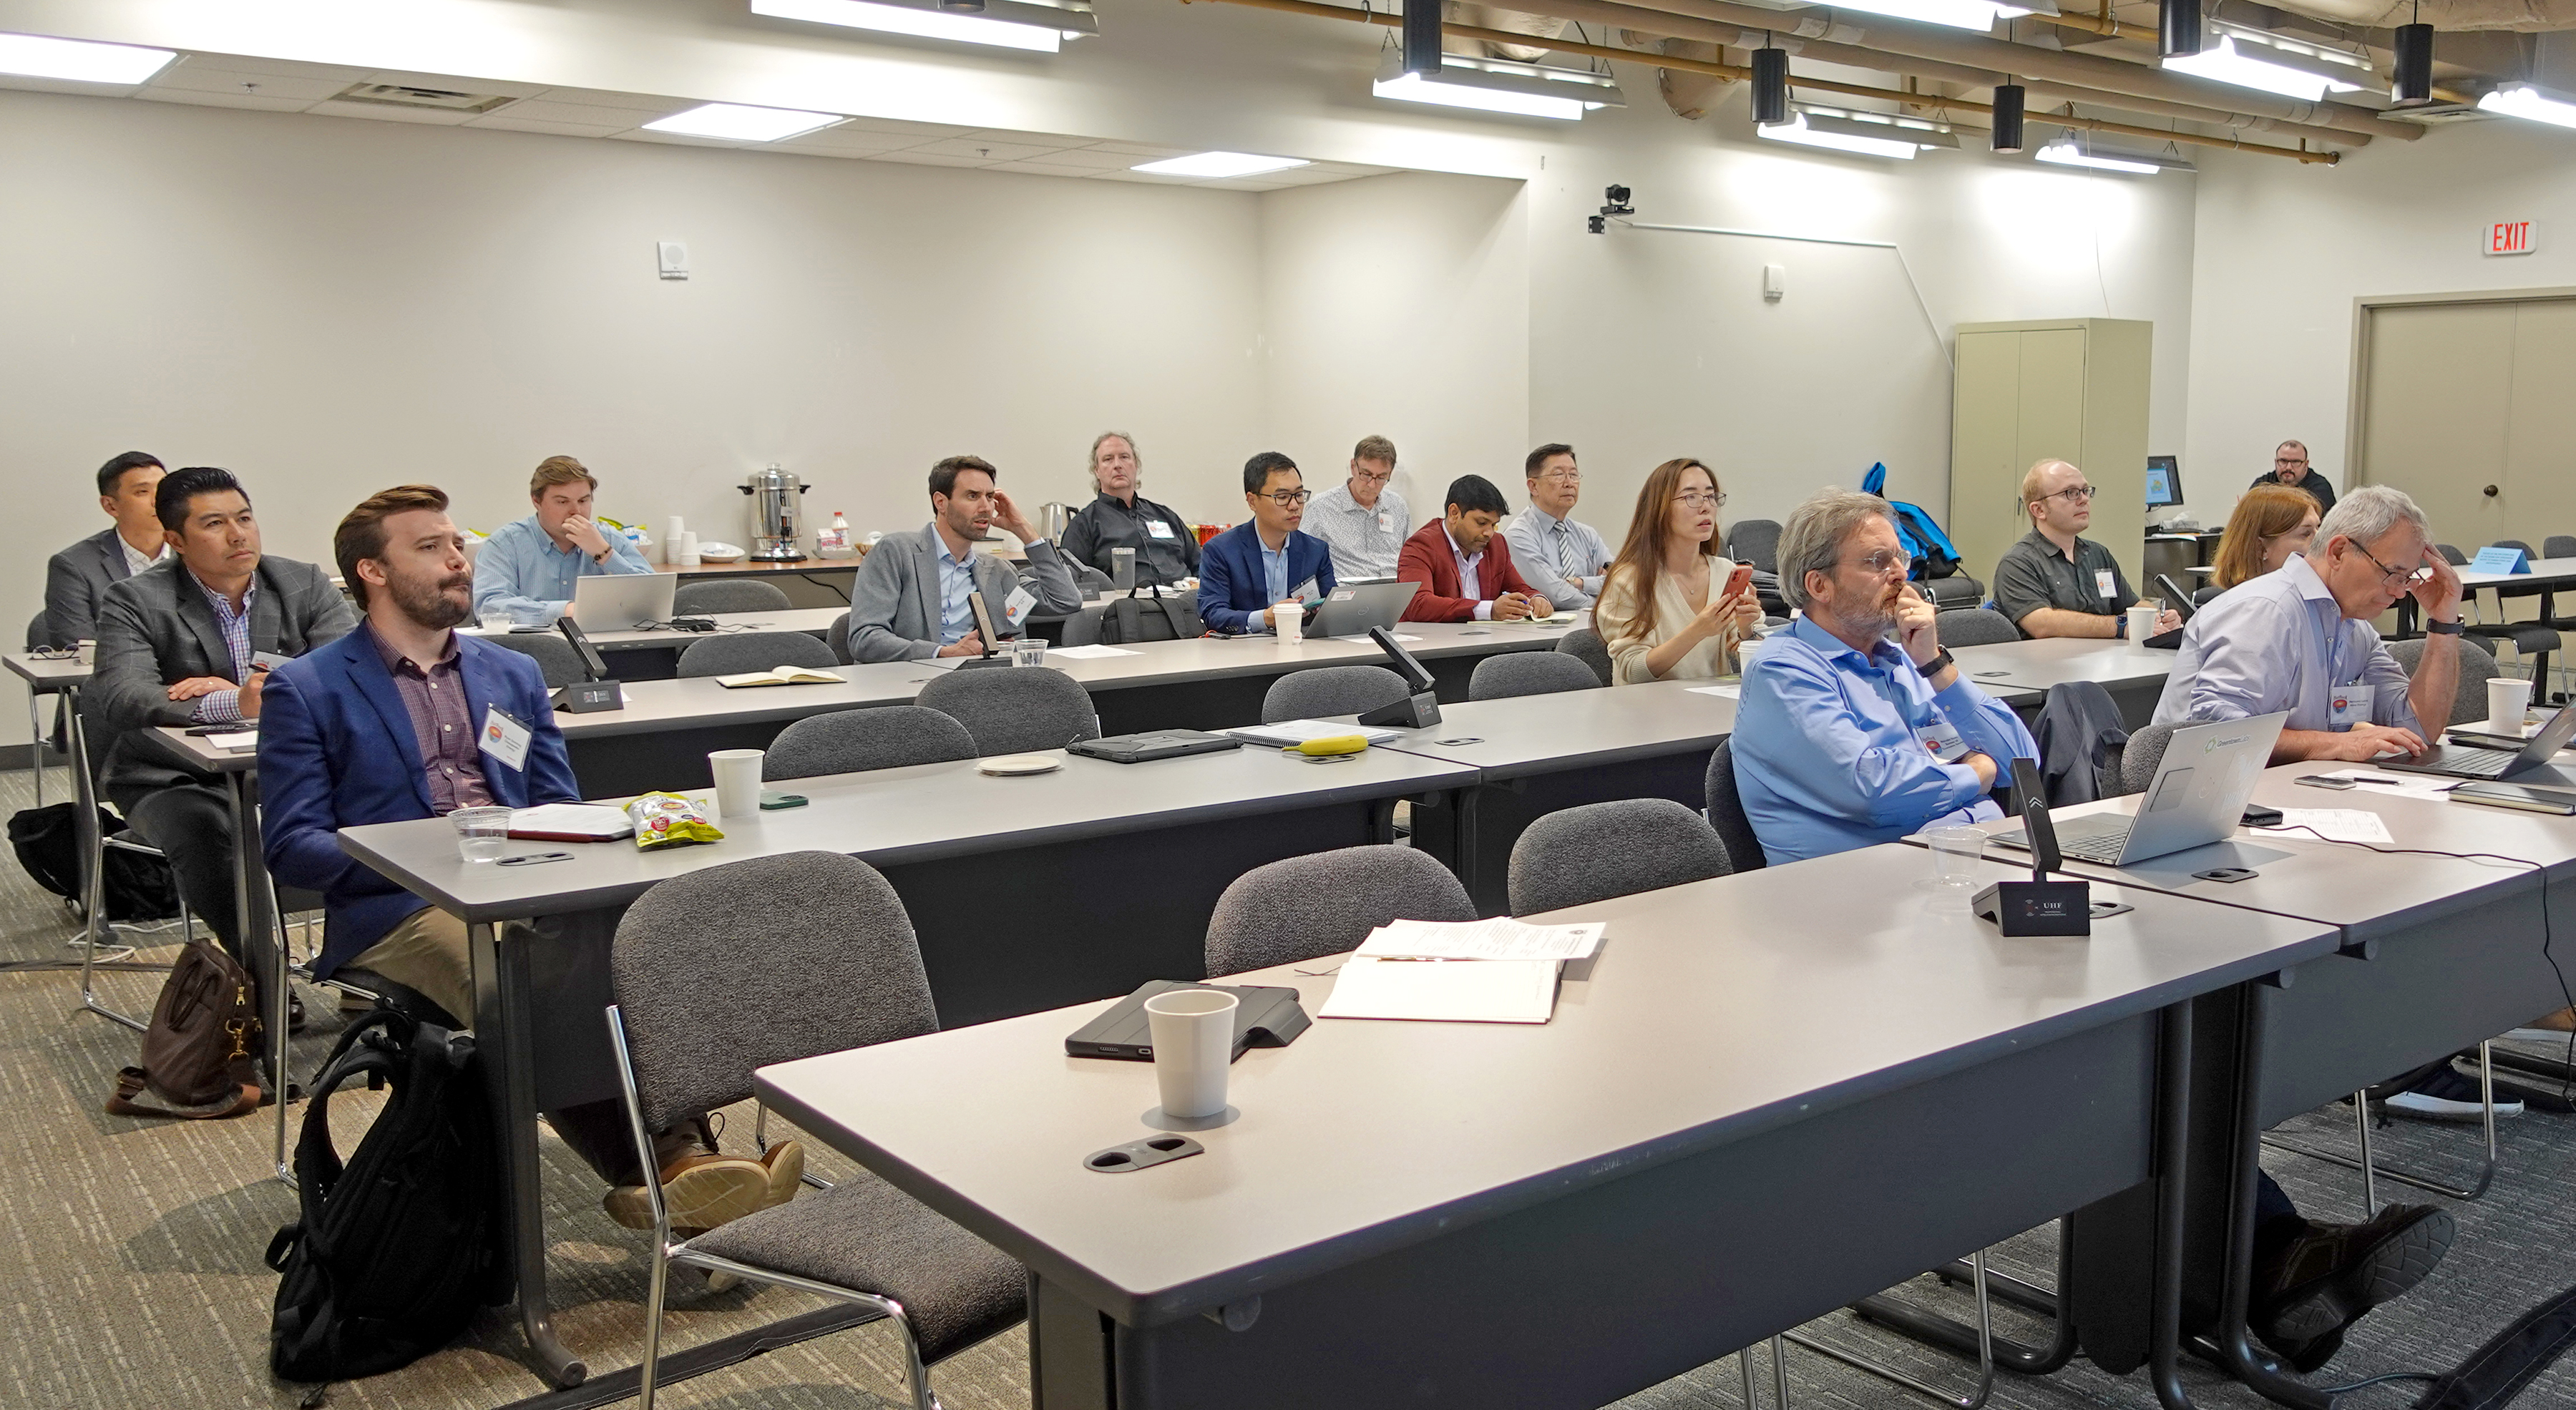 A diverse group of representatives from oil and gas organizations sit in a lecturing hall listening to a presentation by one of the HotRock researchers (out of frame).